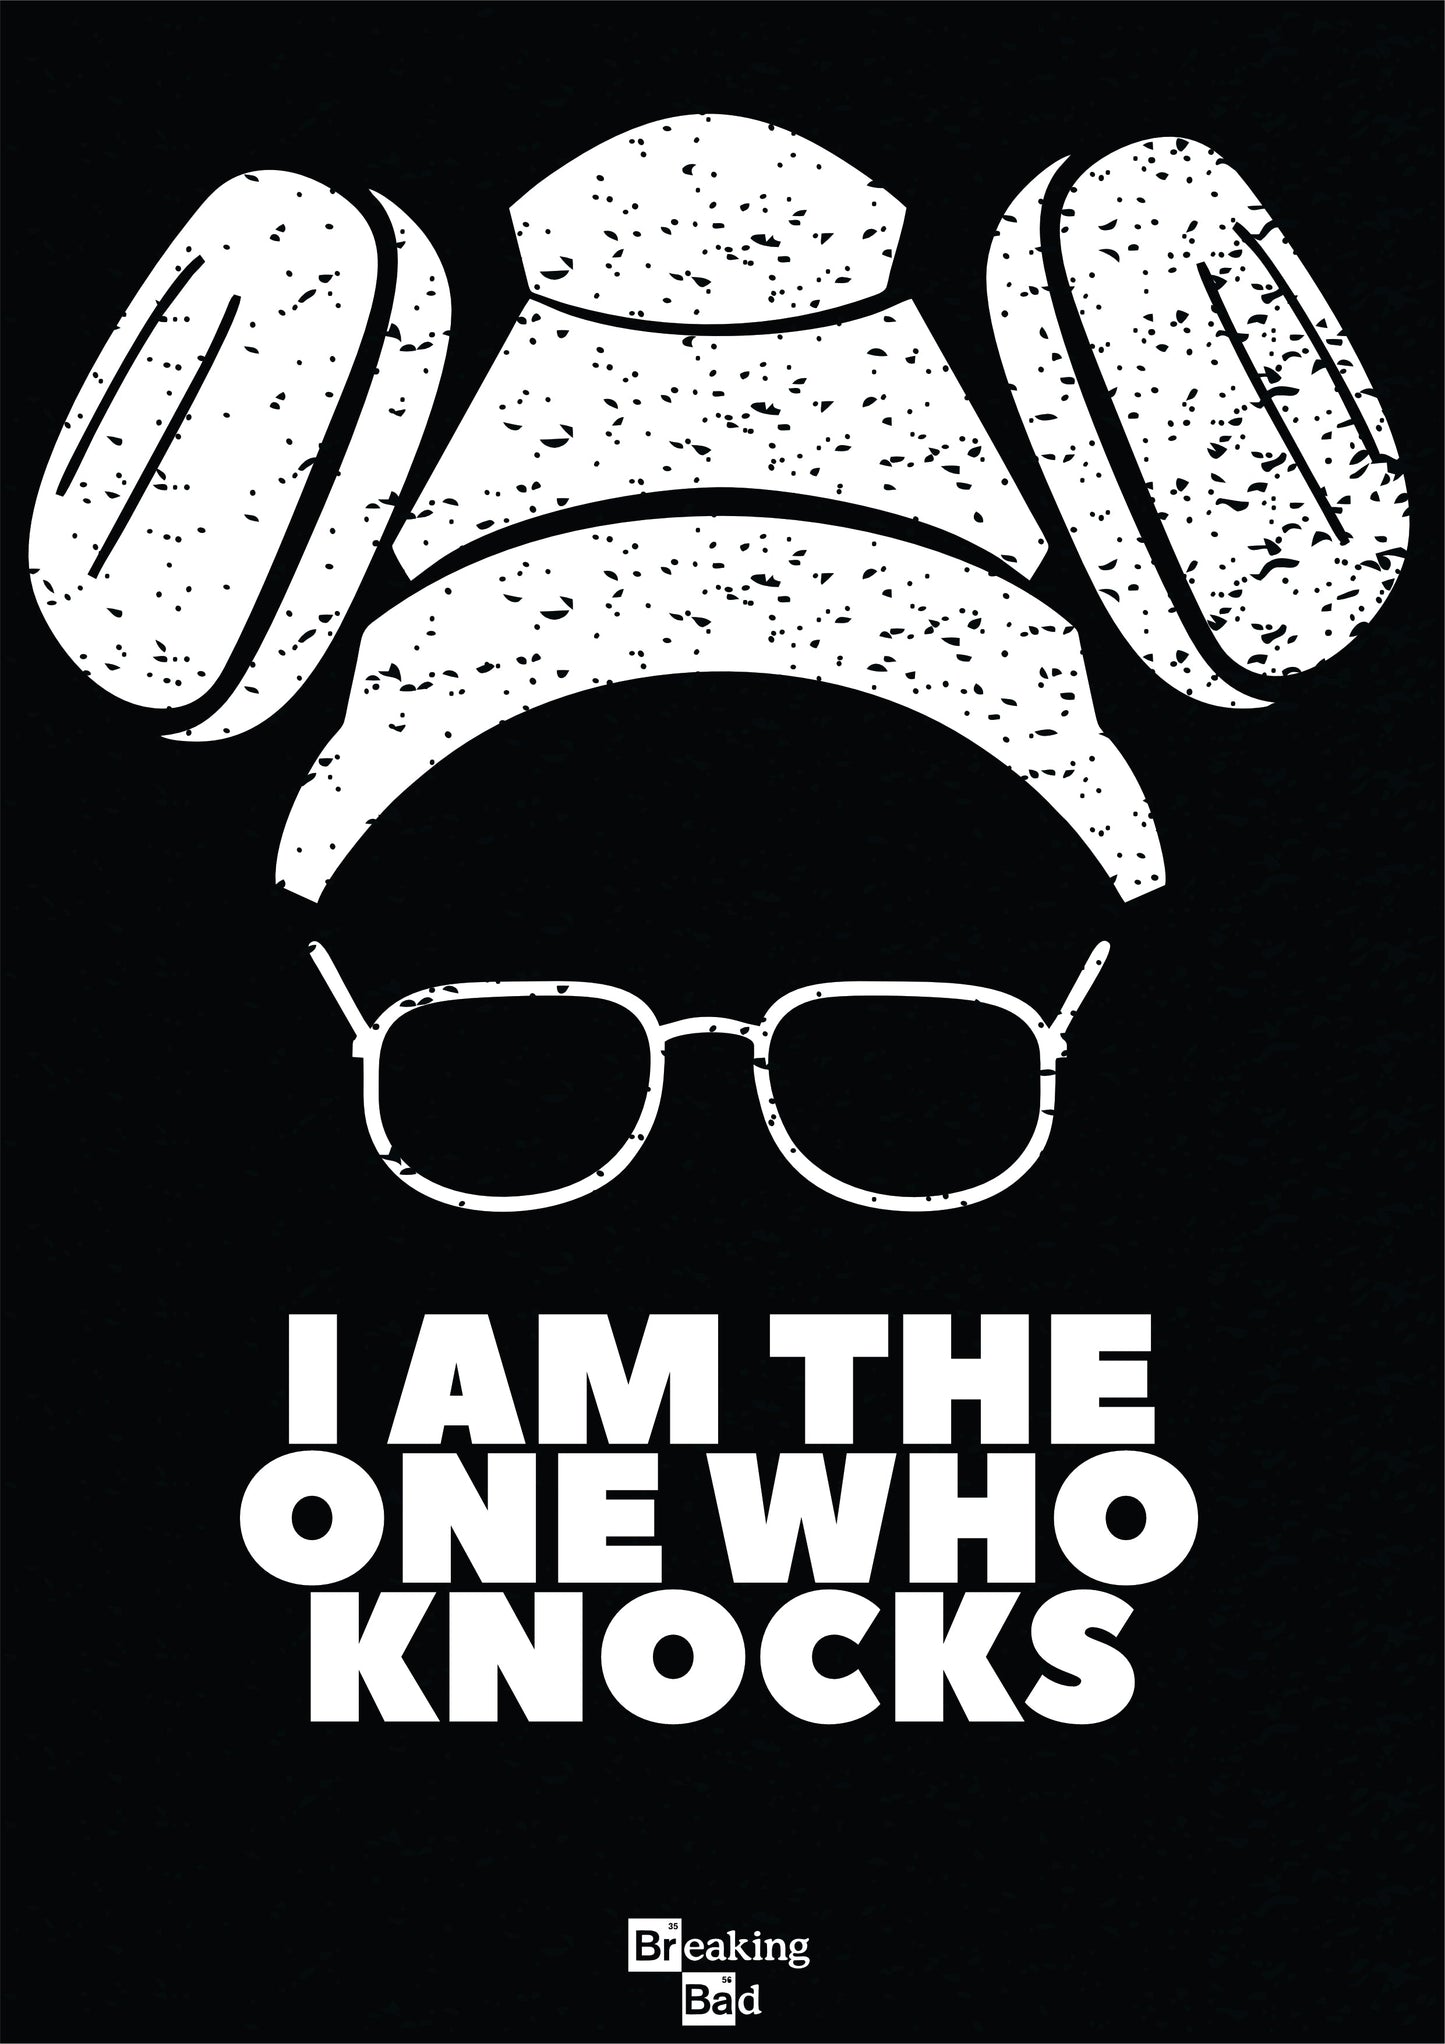 Breaking Bad - I am the one who knocks